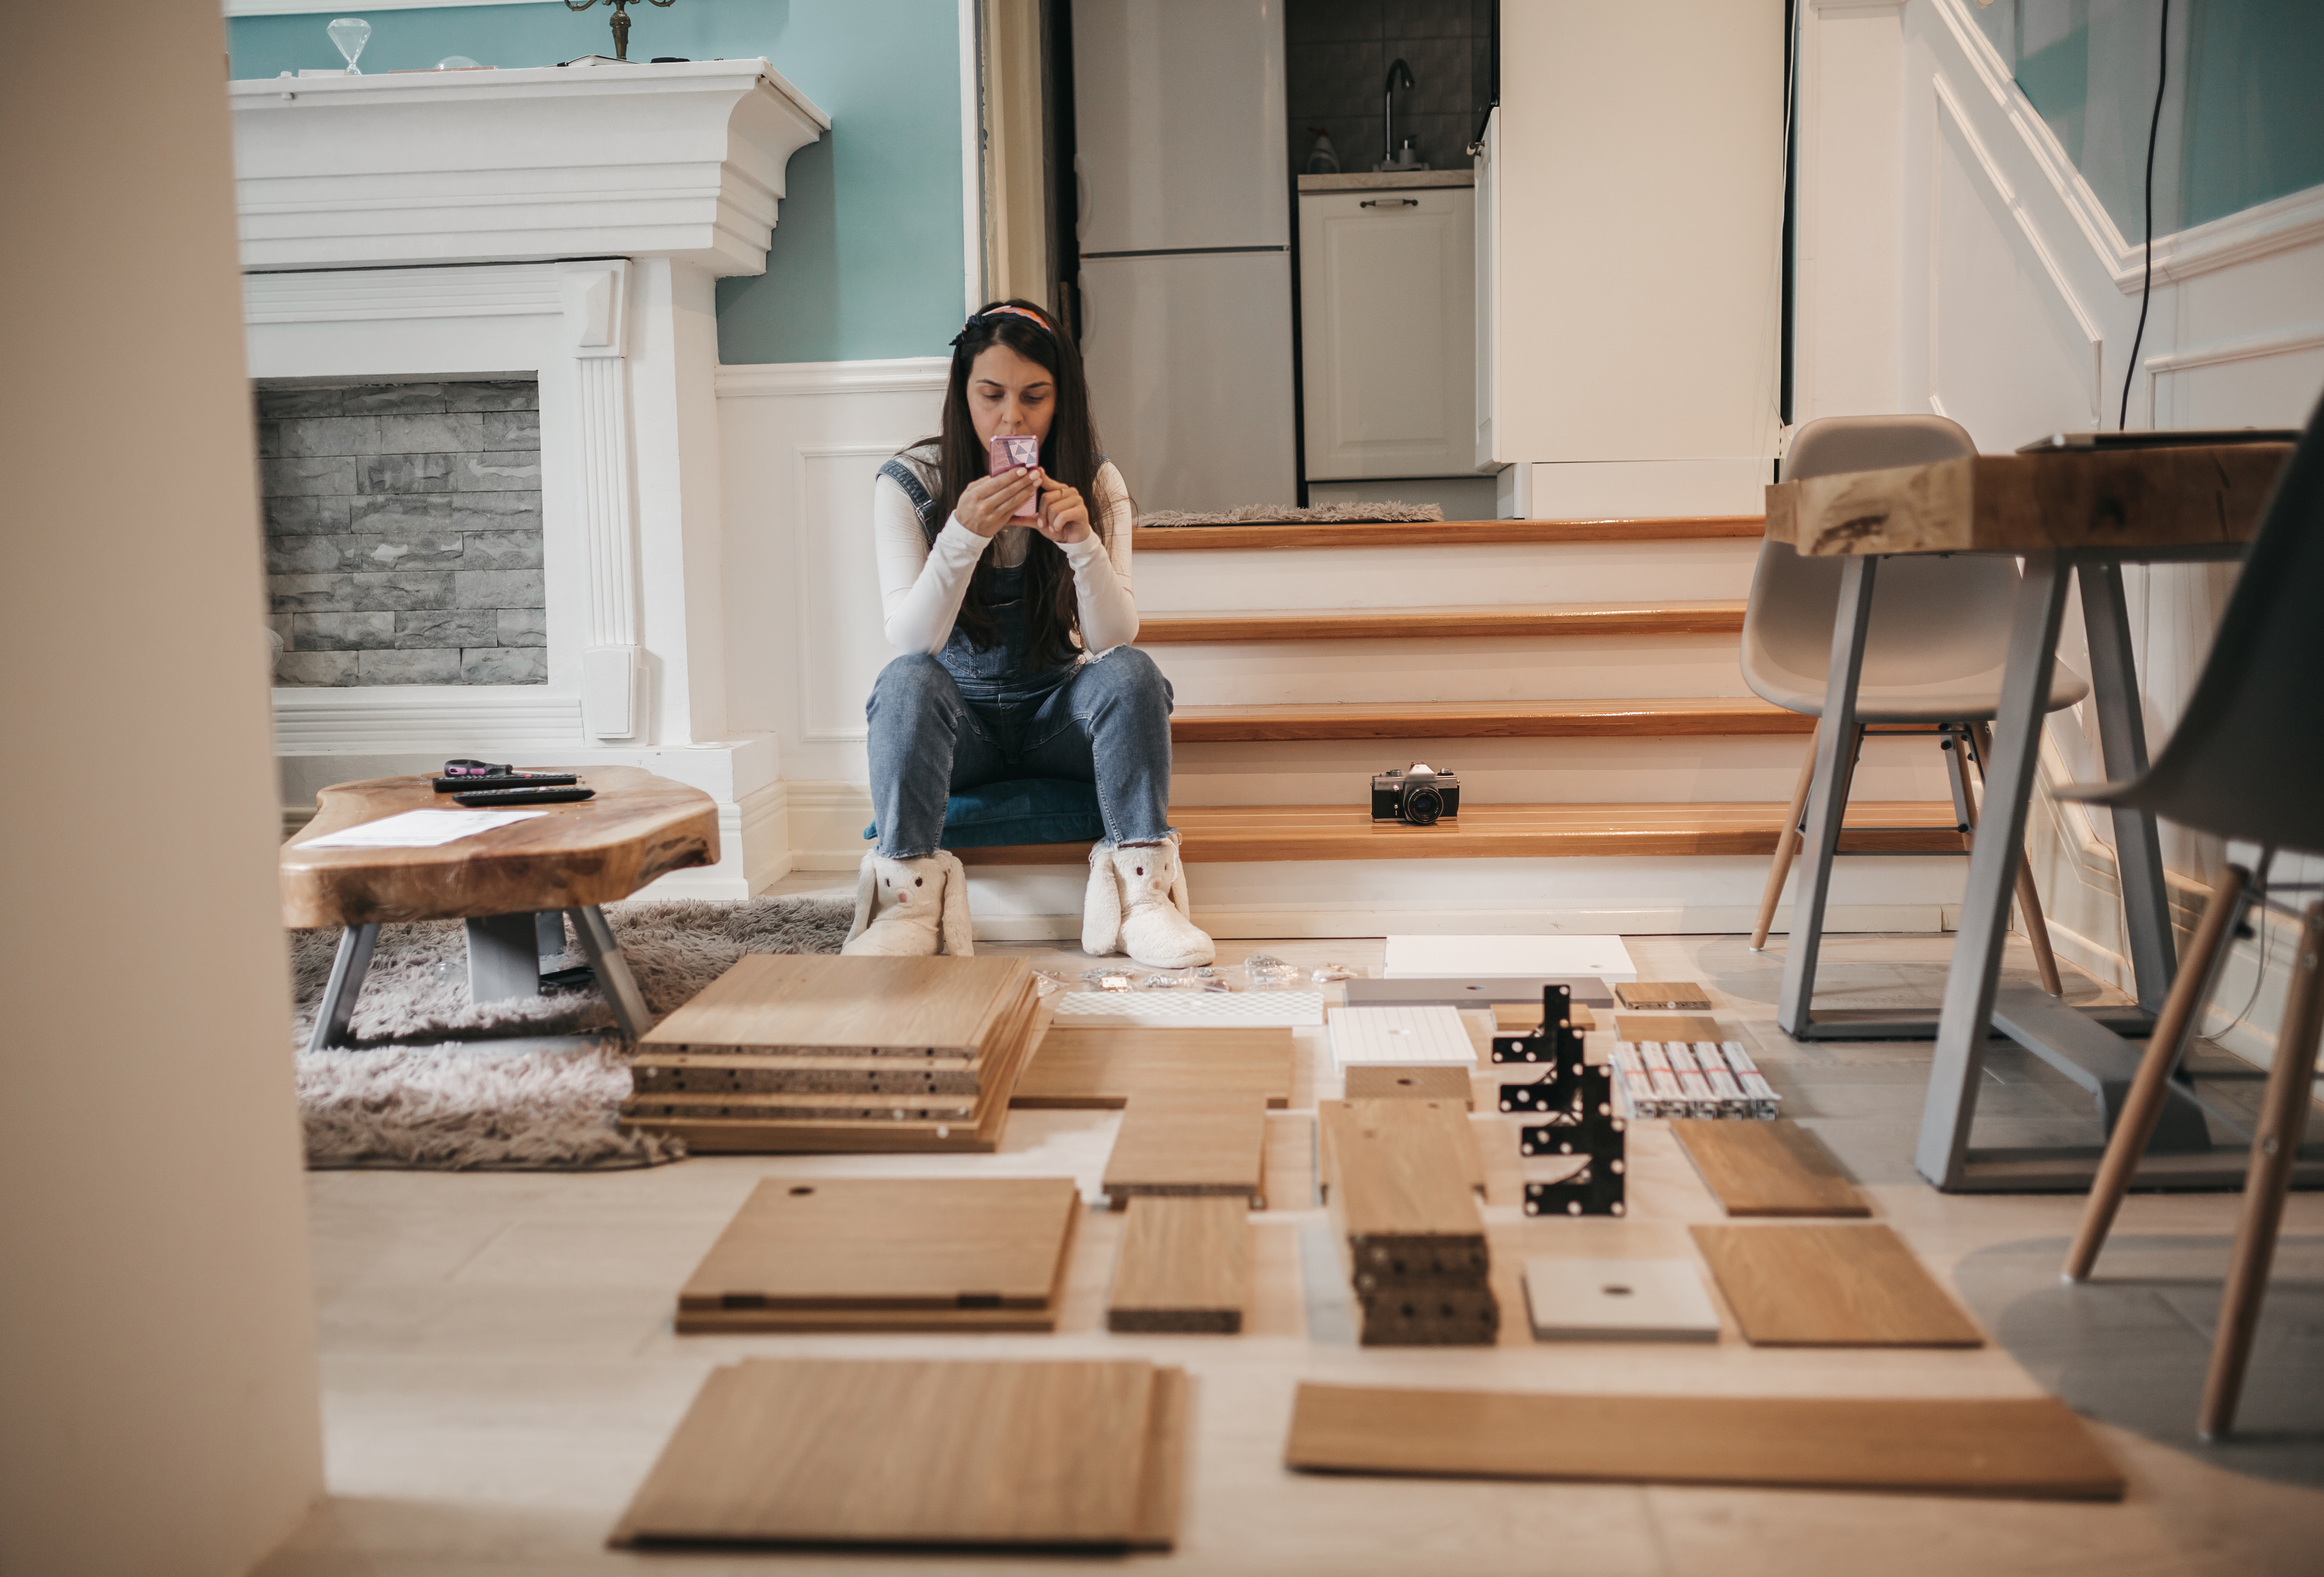 person looking at an unassembled cabinet or furniture piece, stressed